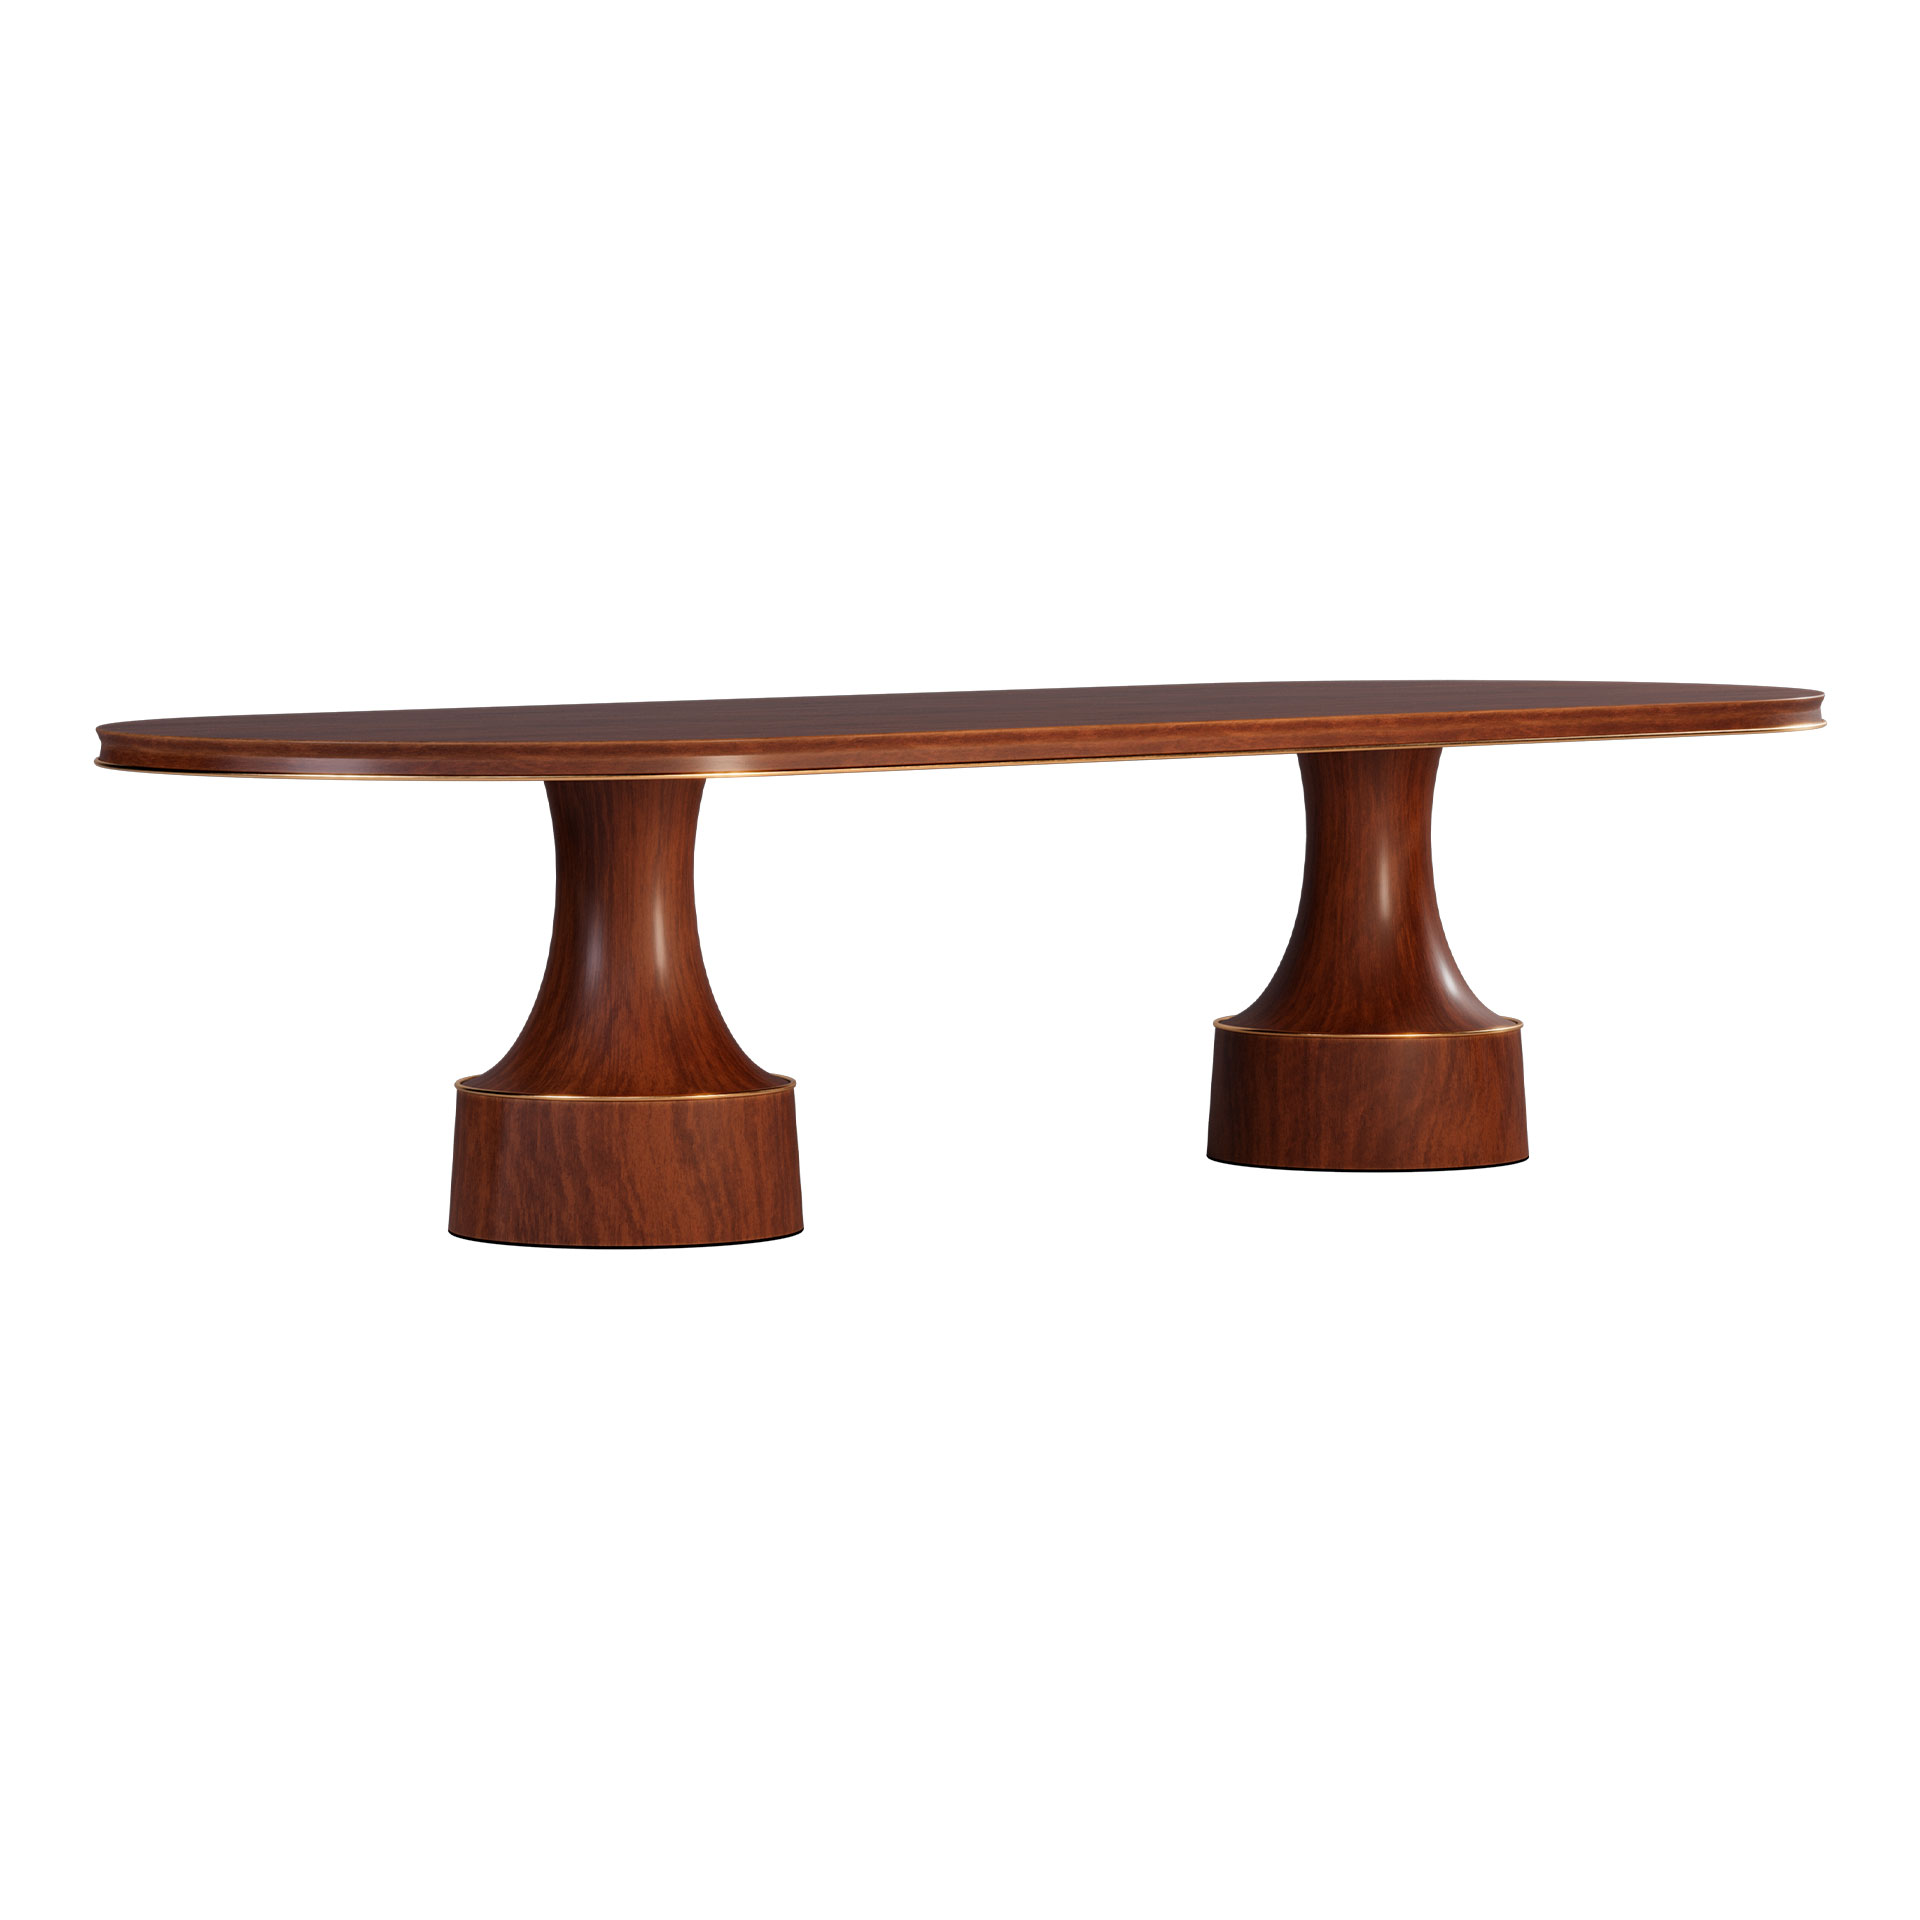 Buck oval dining table